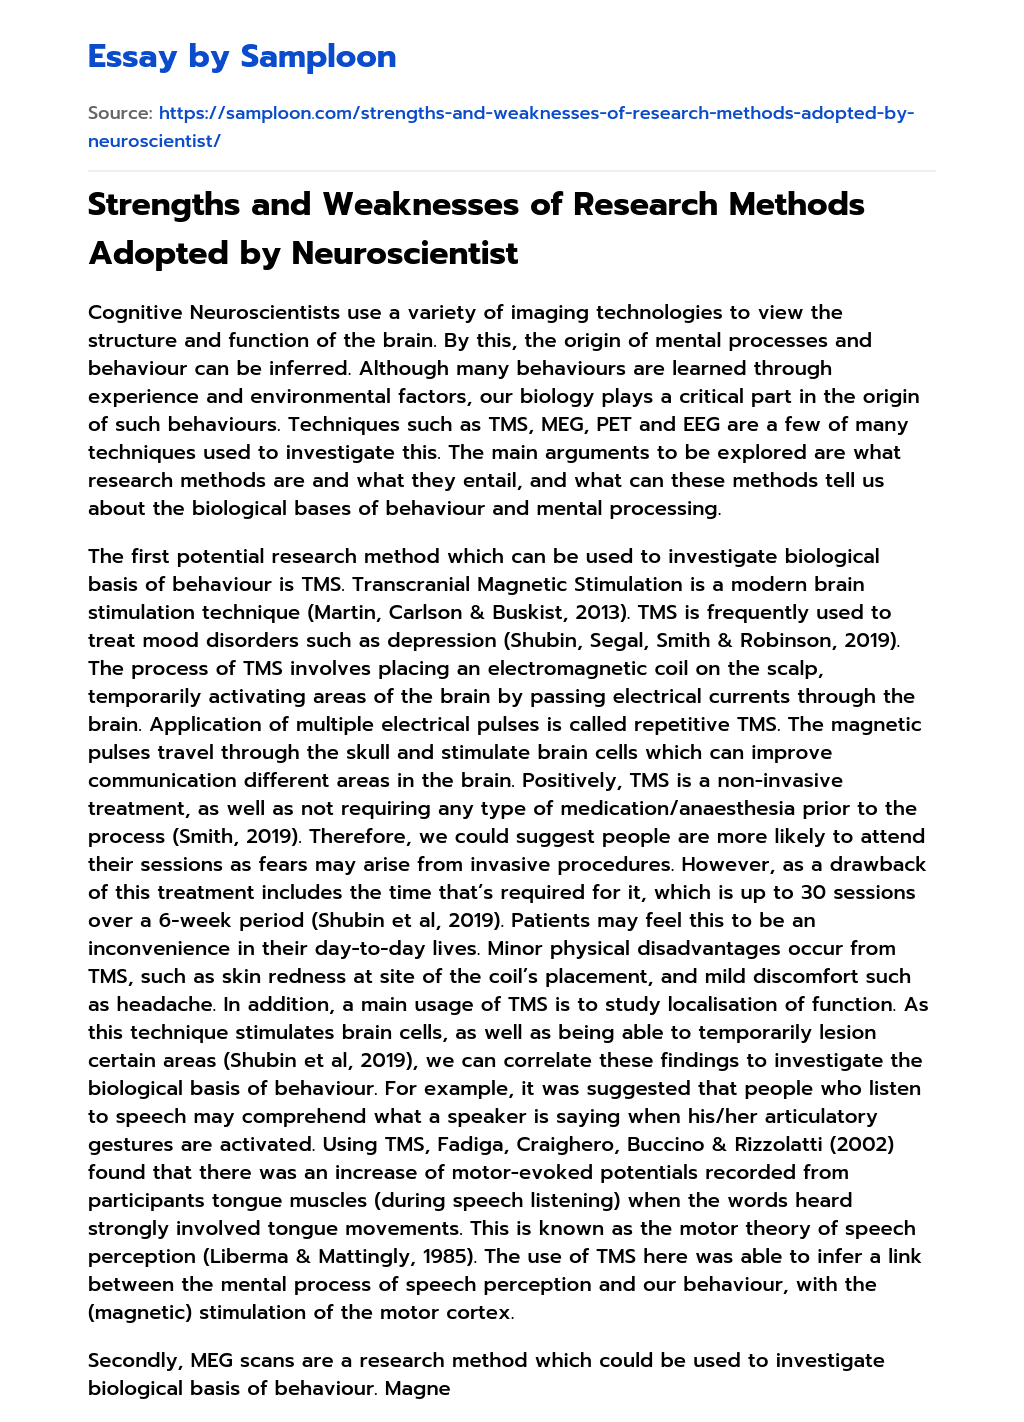 Strengths and Weaknesses of Research Methods Adopted by Neuroscientist  essay